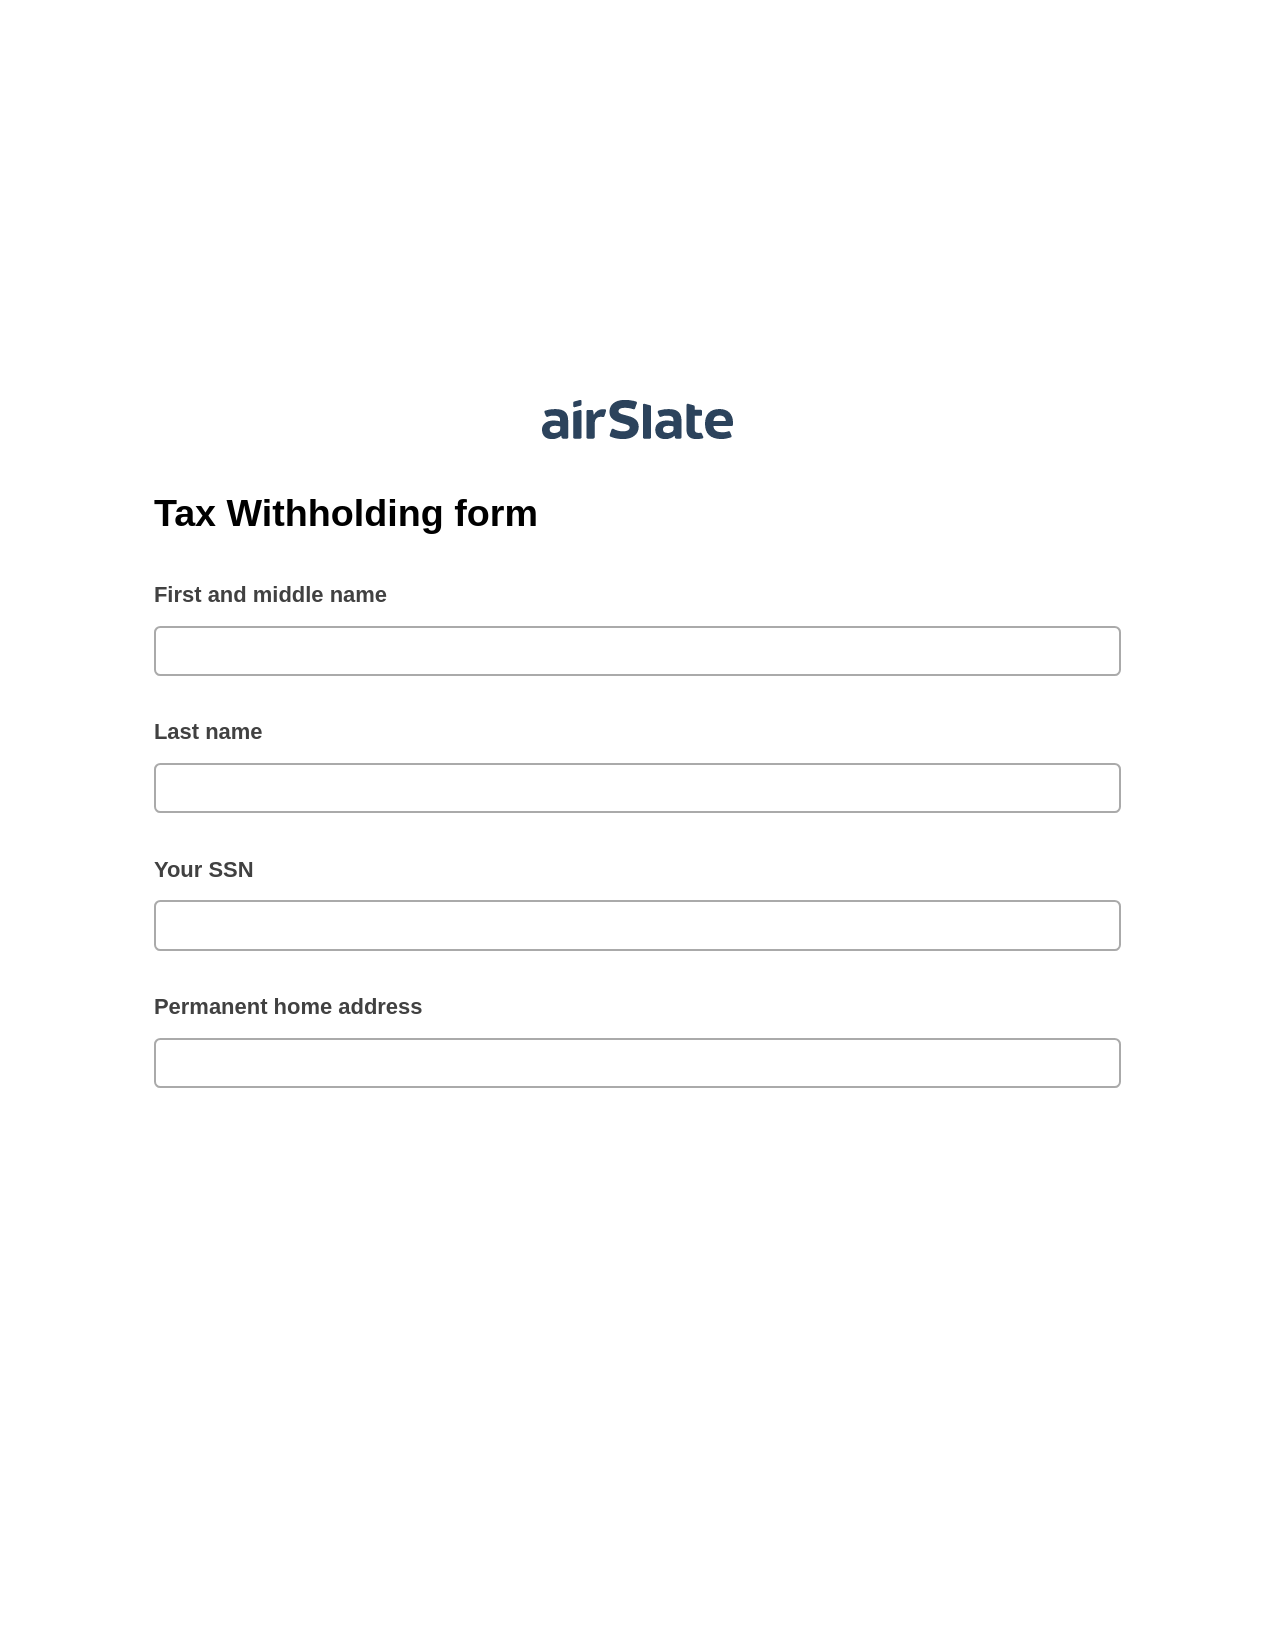 Multirole Tax Withholding form System Bot - Slack Two-Way Binding Bot, Google Calendar Bot, Export to Excel 365 Bot